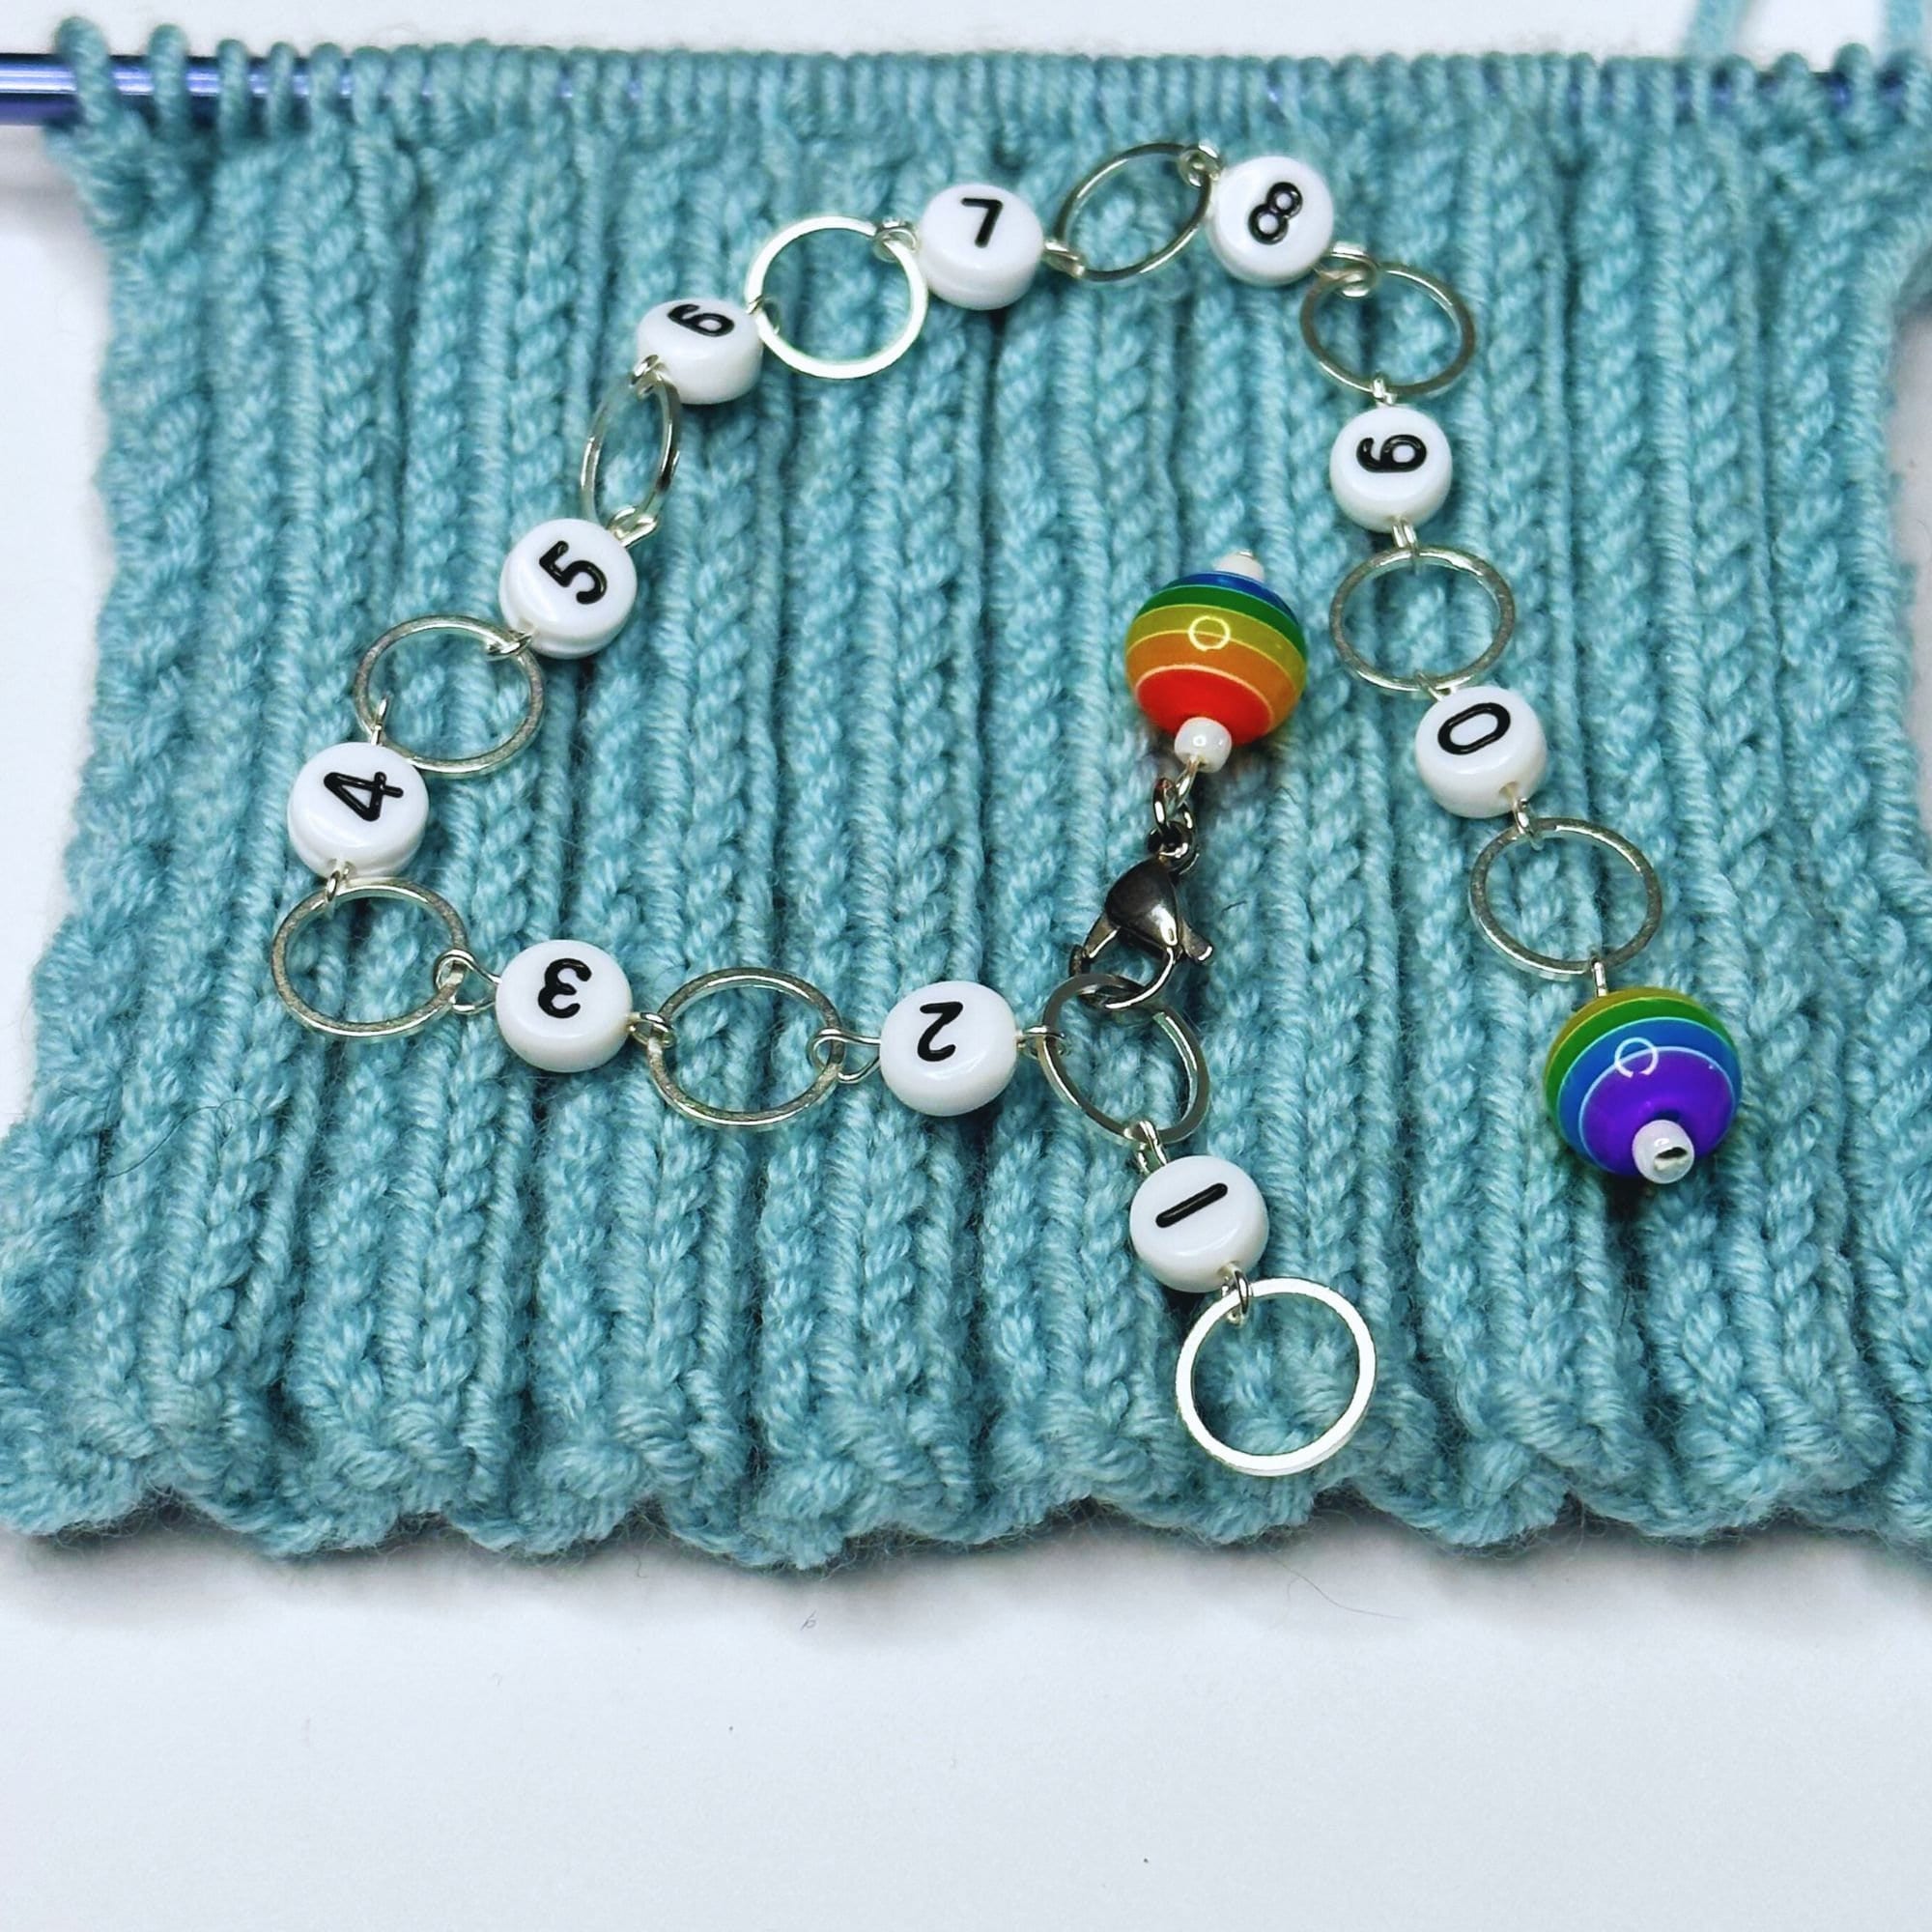 Digital Row Counter Ring Knitting Crochet Tracker Finger Thumb Project Knit  Notions Accessories Tools Stitch Markers Stoppers Pattern -  Israel